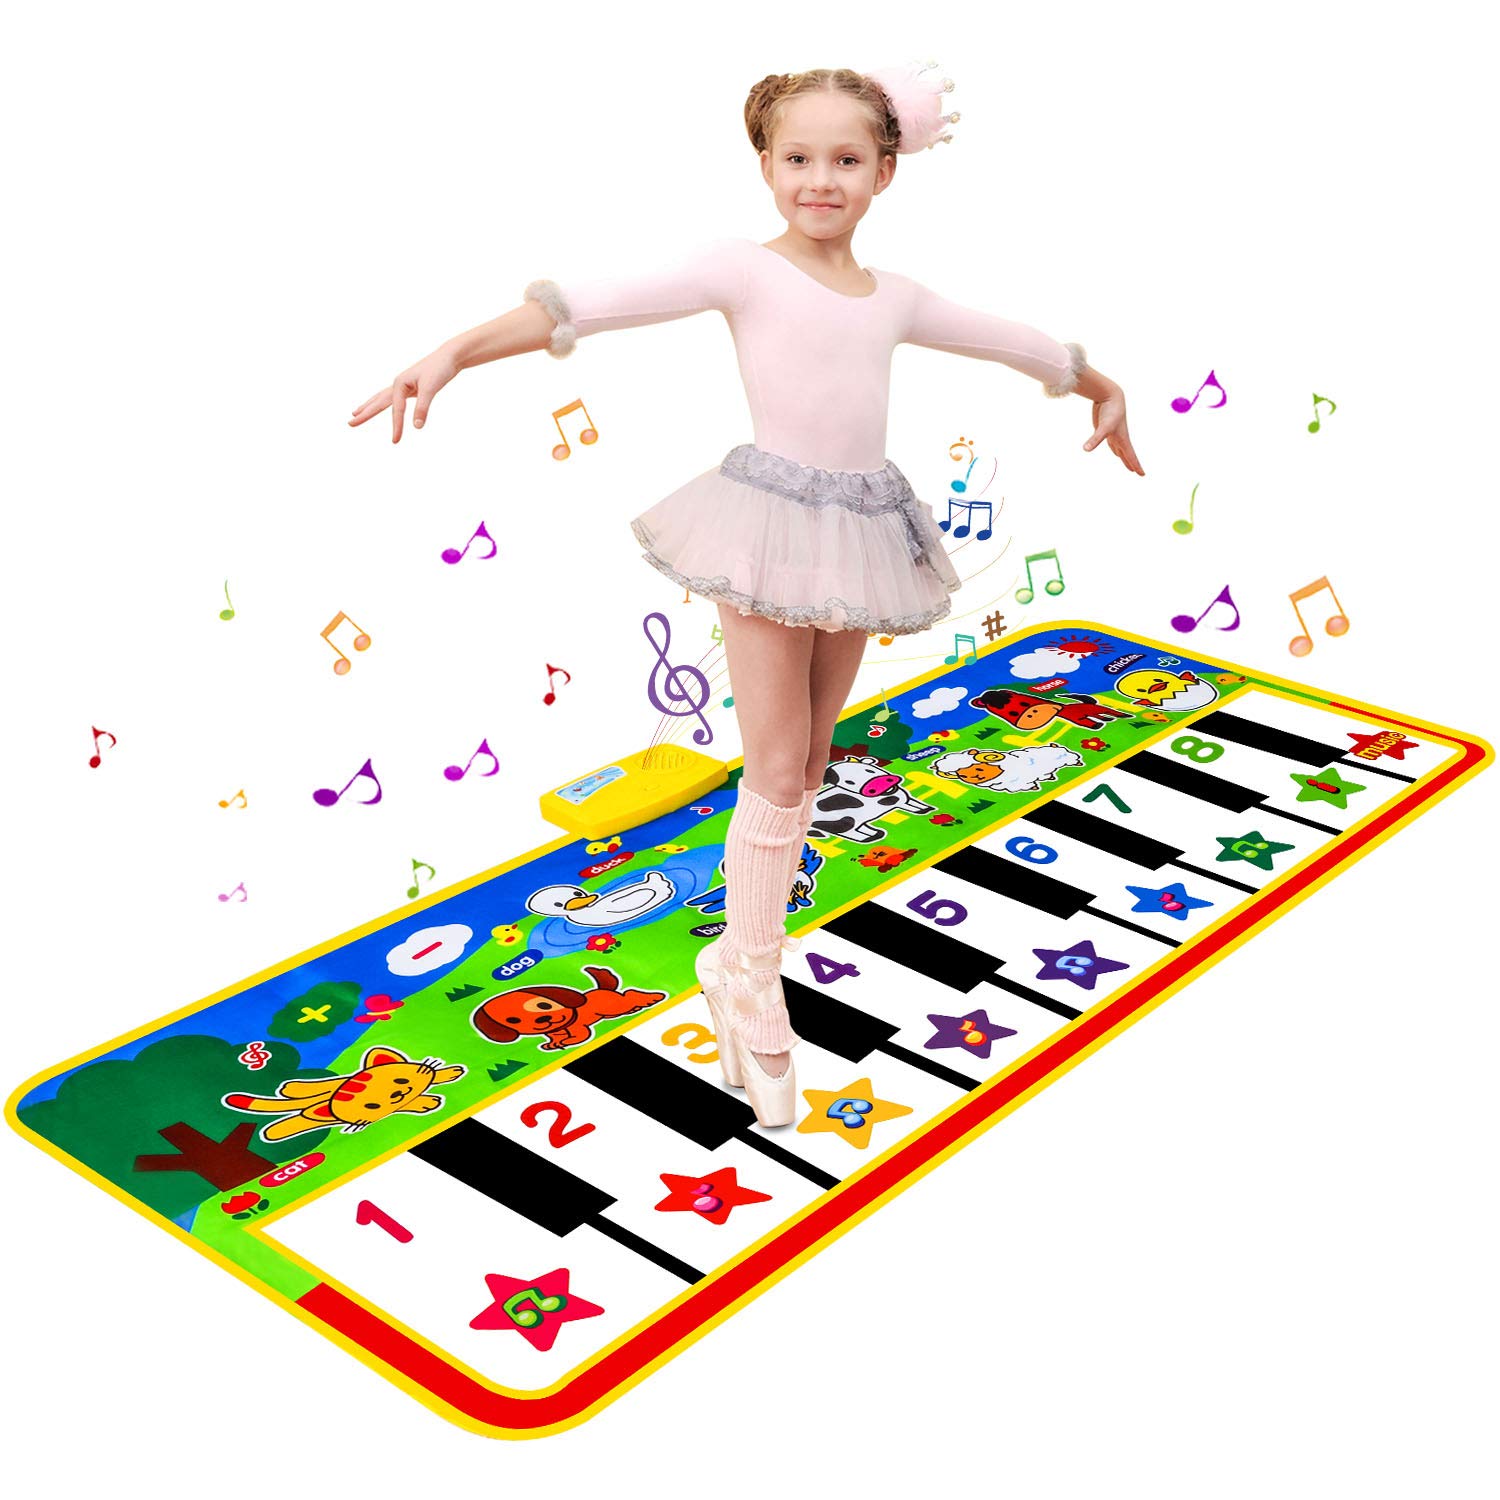 M SANMERSEN Piano Mat, 53'' x 23'' Musical Toys for Toddlers Floor Piano Touch Playmat with 8 Animal Sounds, Music Piano Keyboard Dance Mat Early Educational Toys Gift for Boys Girls Kids Ages 1-5